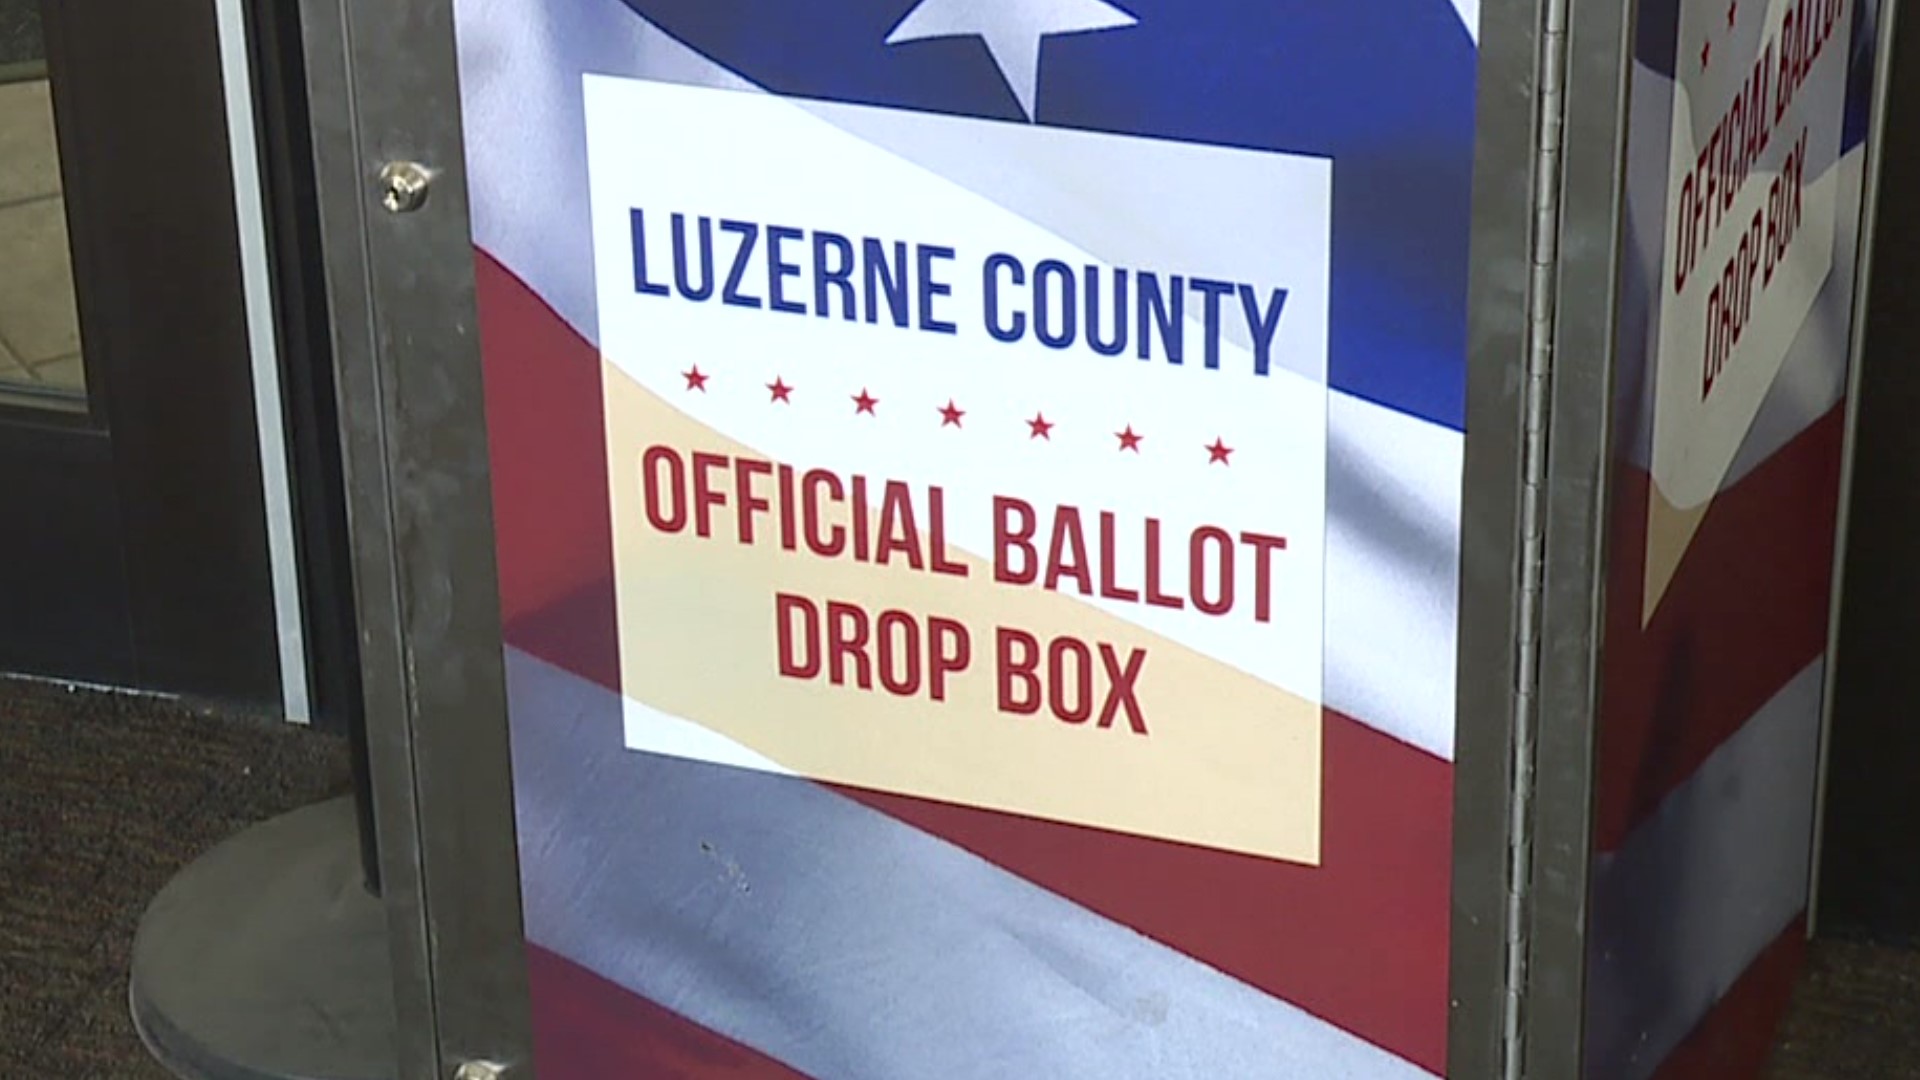 In Luzerne County, elections these days are often less about the candidates and more about the people in charge of making sure everything runs smoothly.